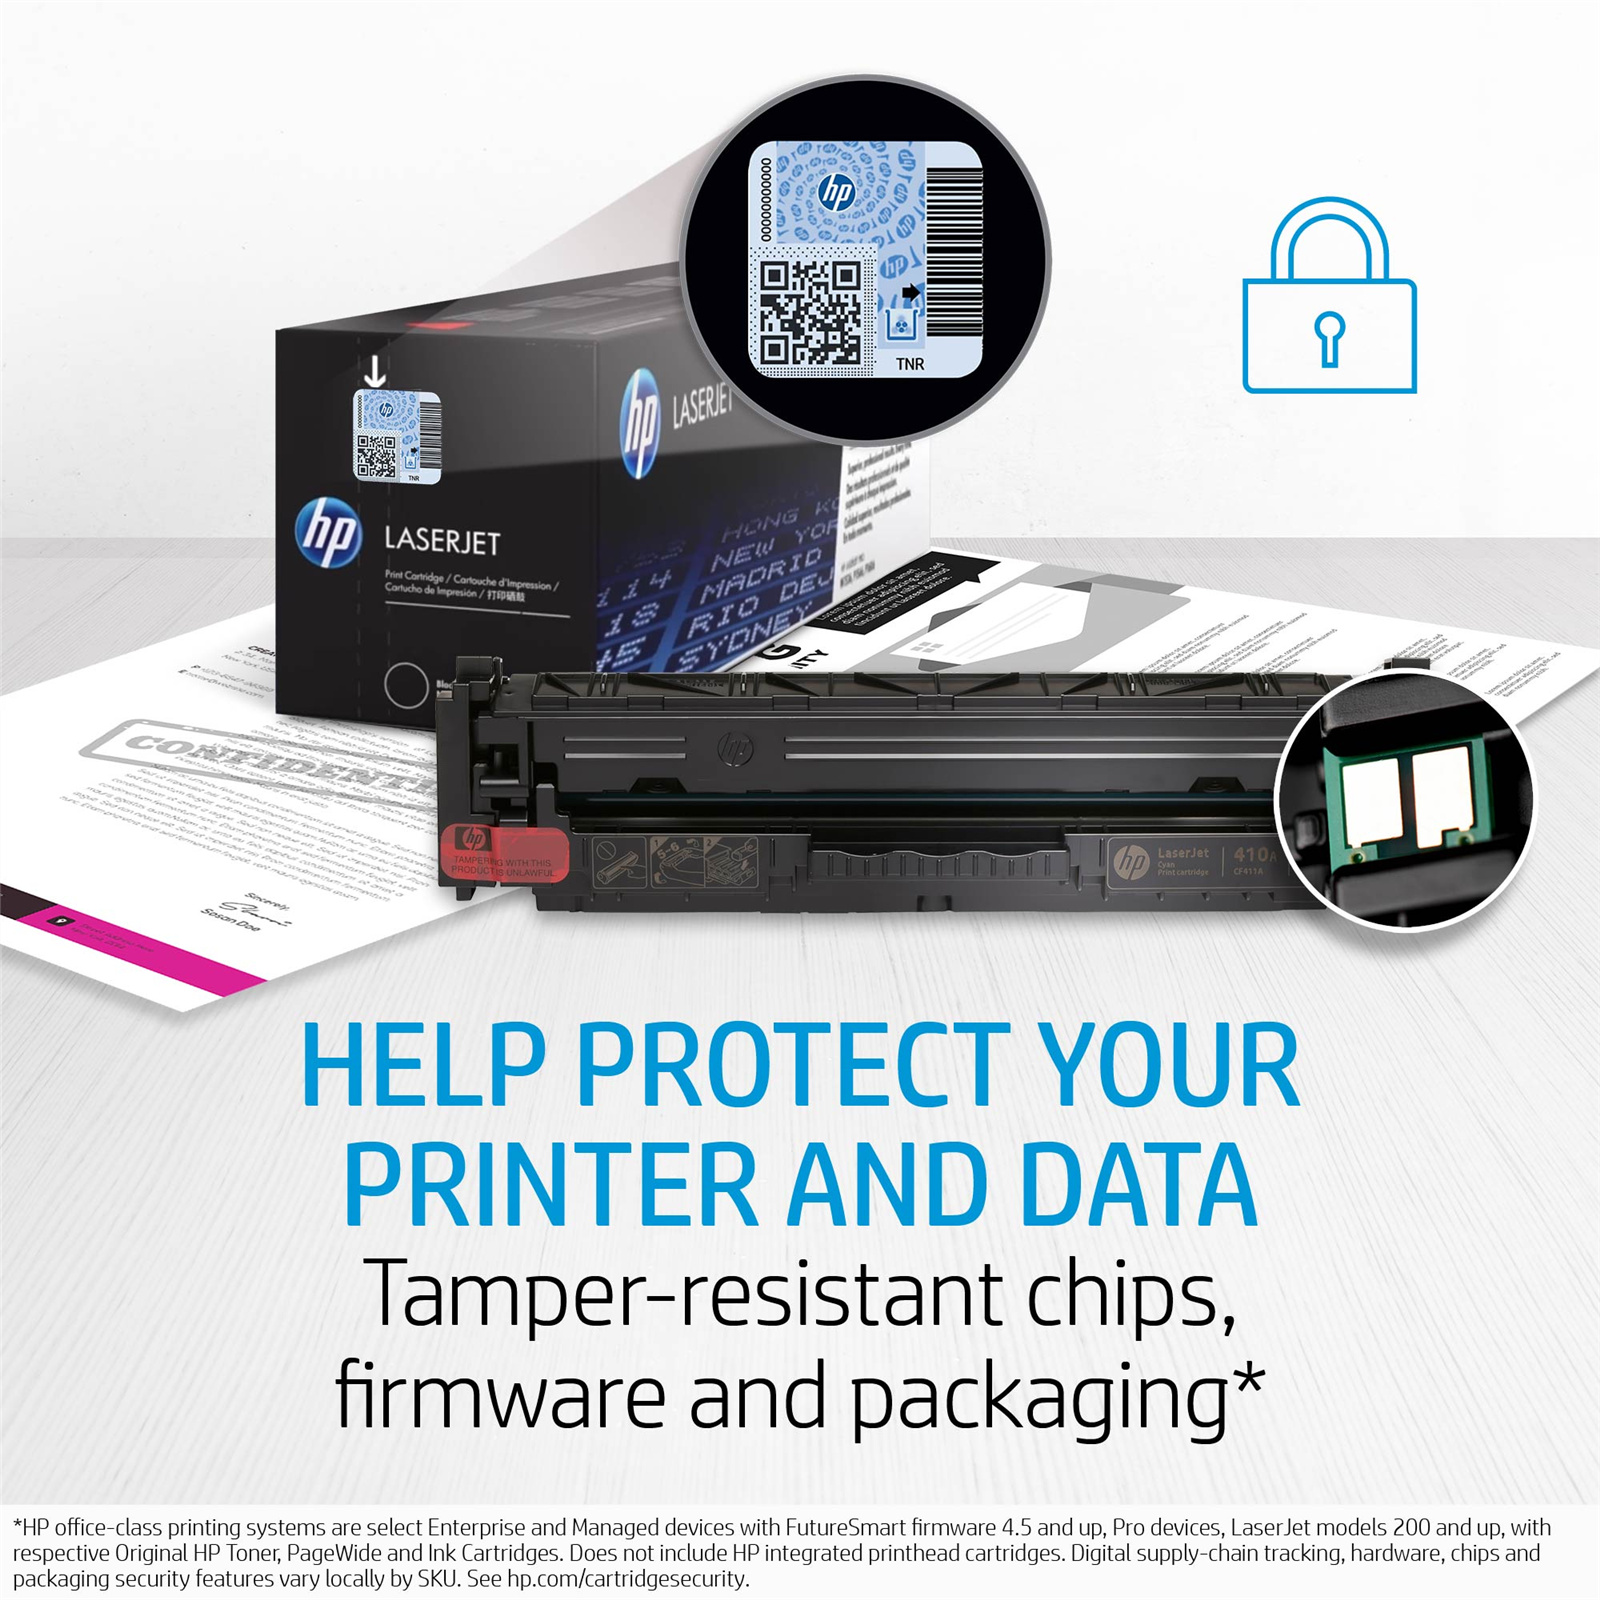 Buy the HP 202A Toner Black, Yield 1400 pages for HP Colour LaserJet Pro...  ( CF500A ) online - PBTech.com/pacific